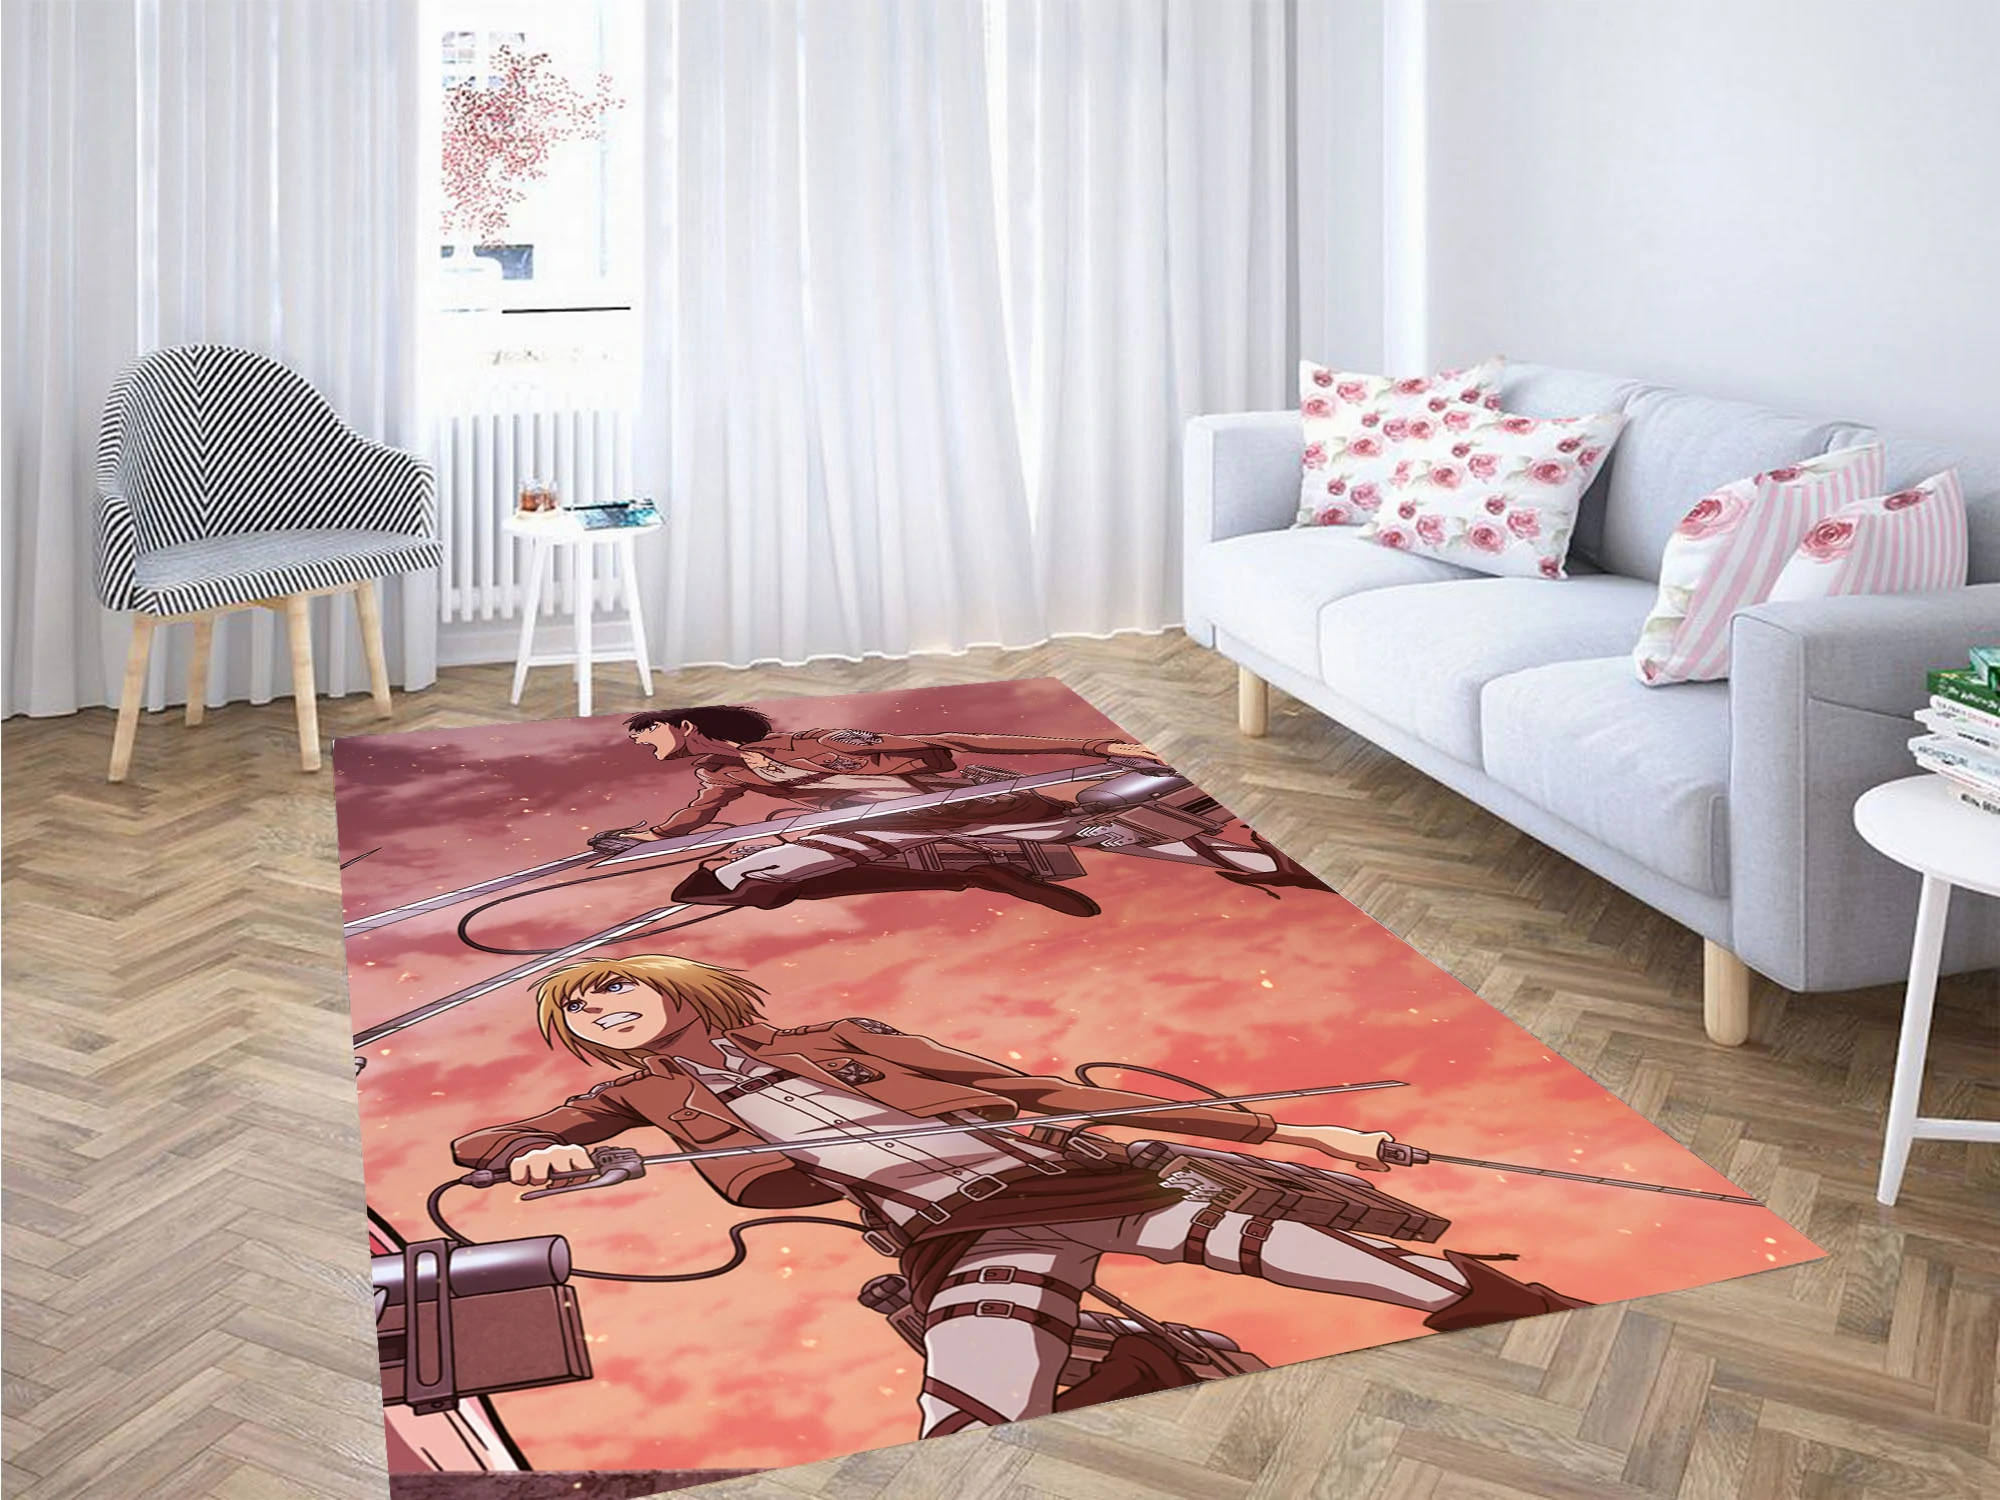 ARMIN AND EREN ATTACK ON TITAN CARPET RUG – CUSTOM SIZE AND PRINTING